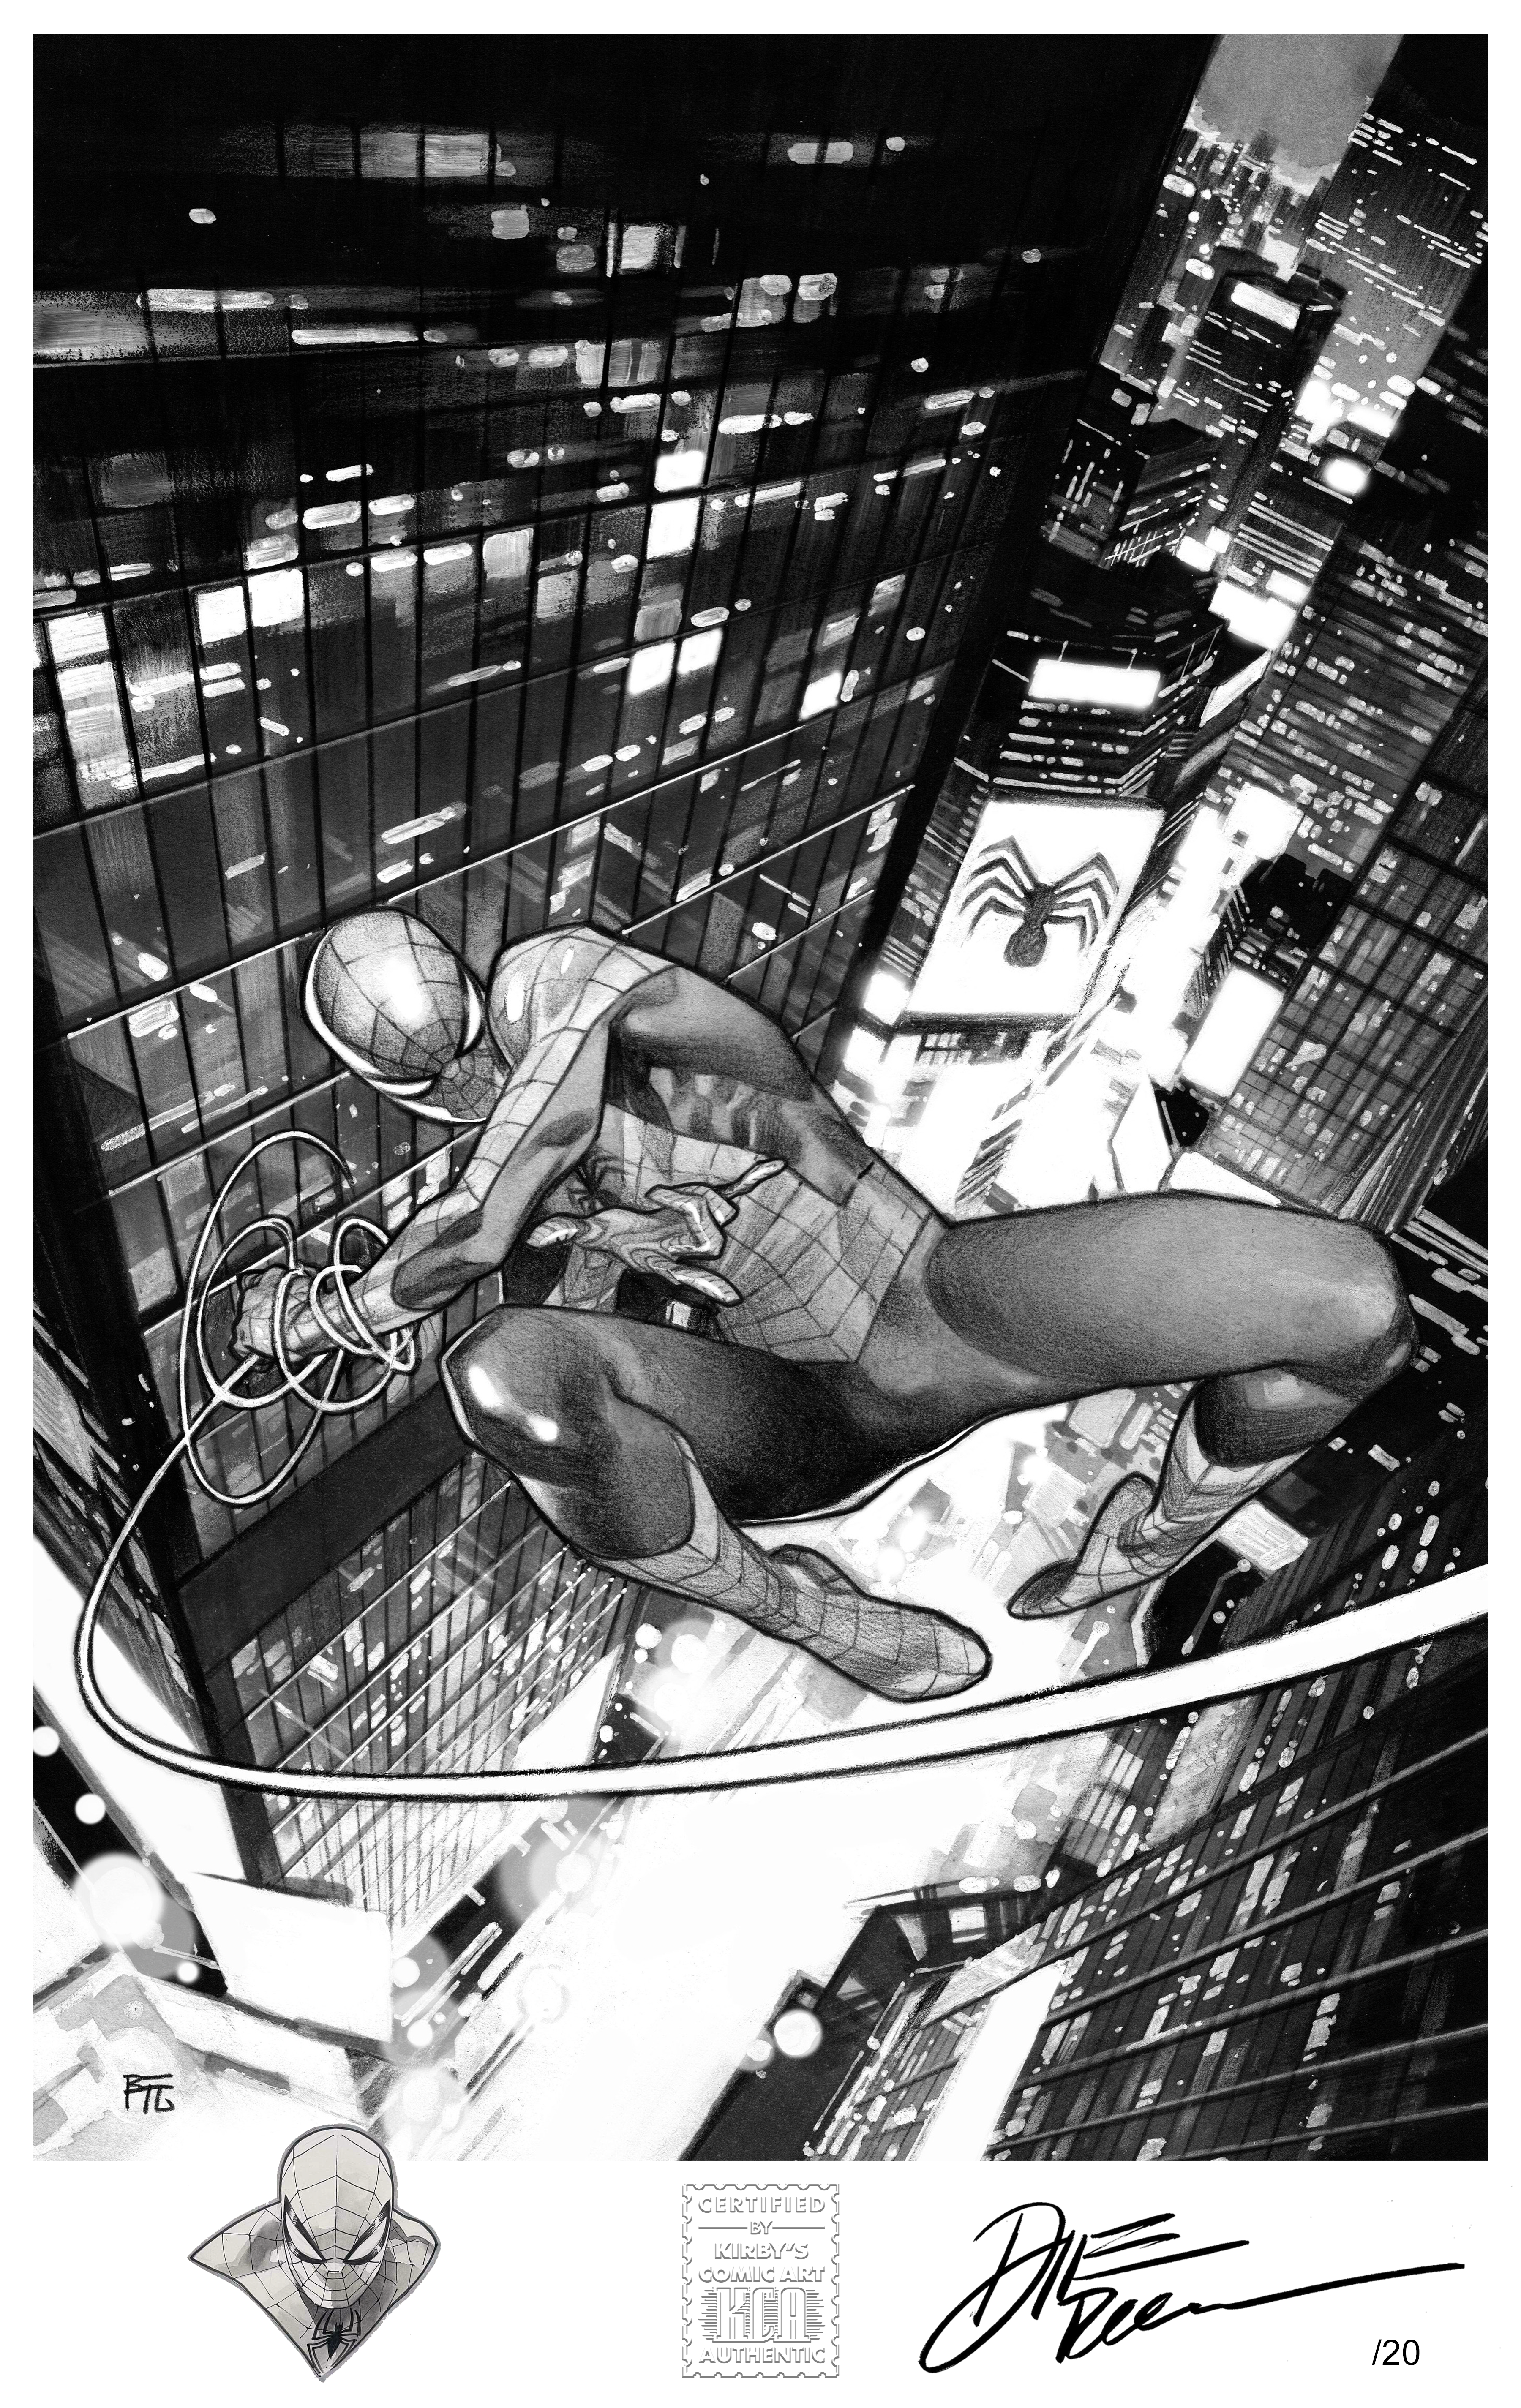 20 Limited Numbered, Signed & Remarqued Editions Available - Dike Ruan Ultimate Spider-Man 12x19